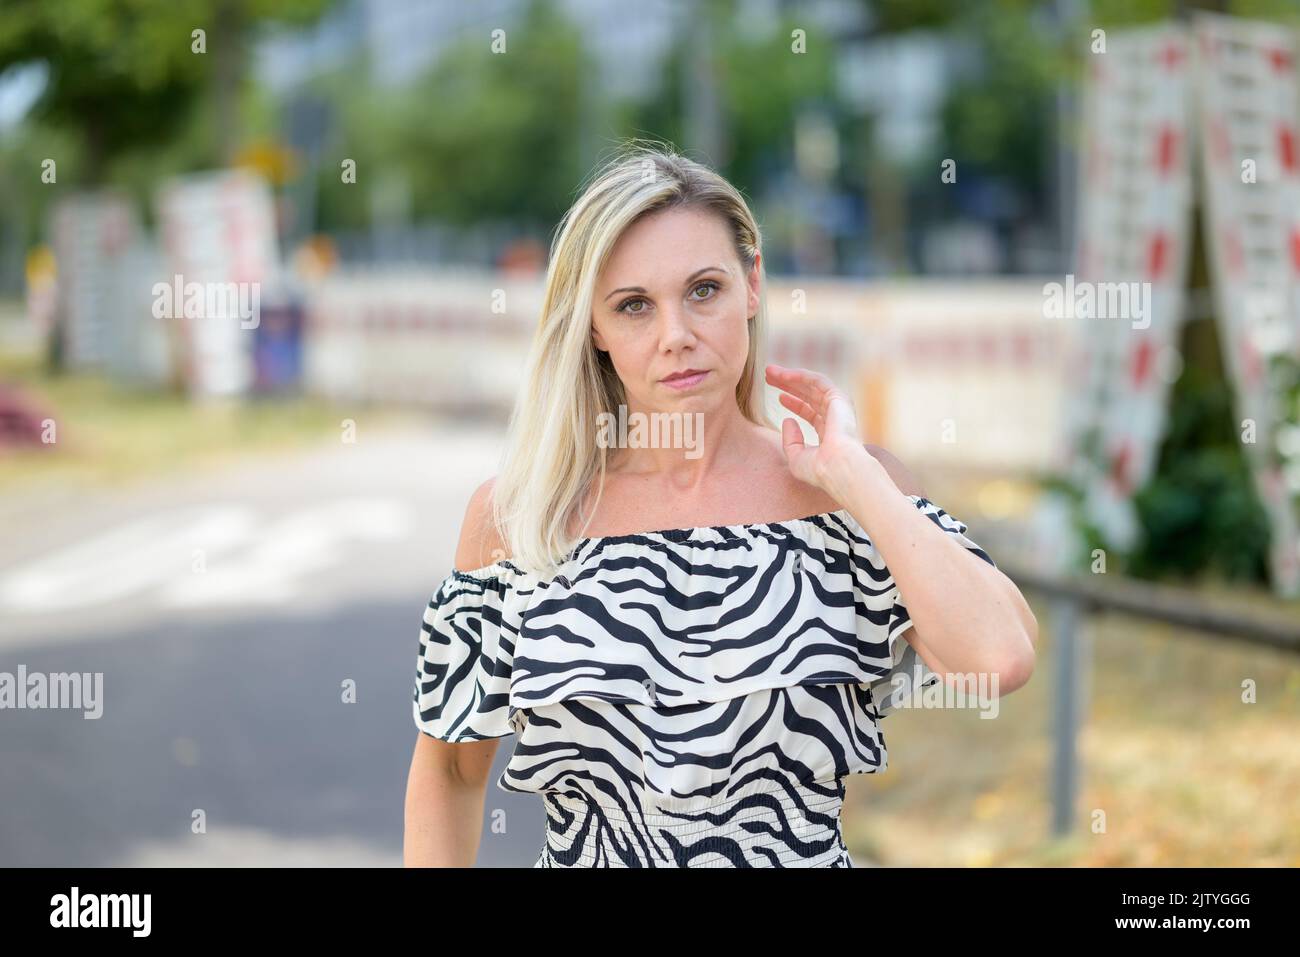 Serious blond woman walking down a quiet street with her hand raised to her hair looking thoughtfully at camera Stock Photo